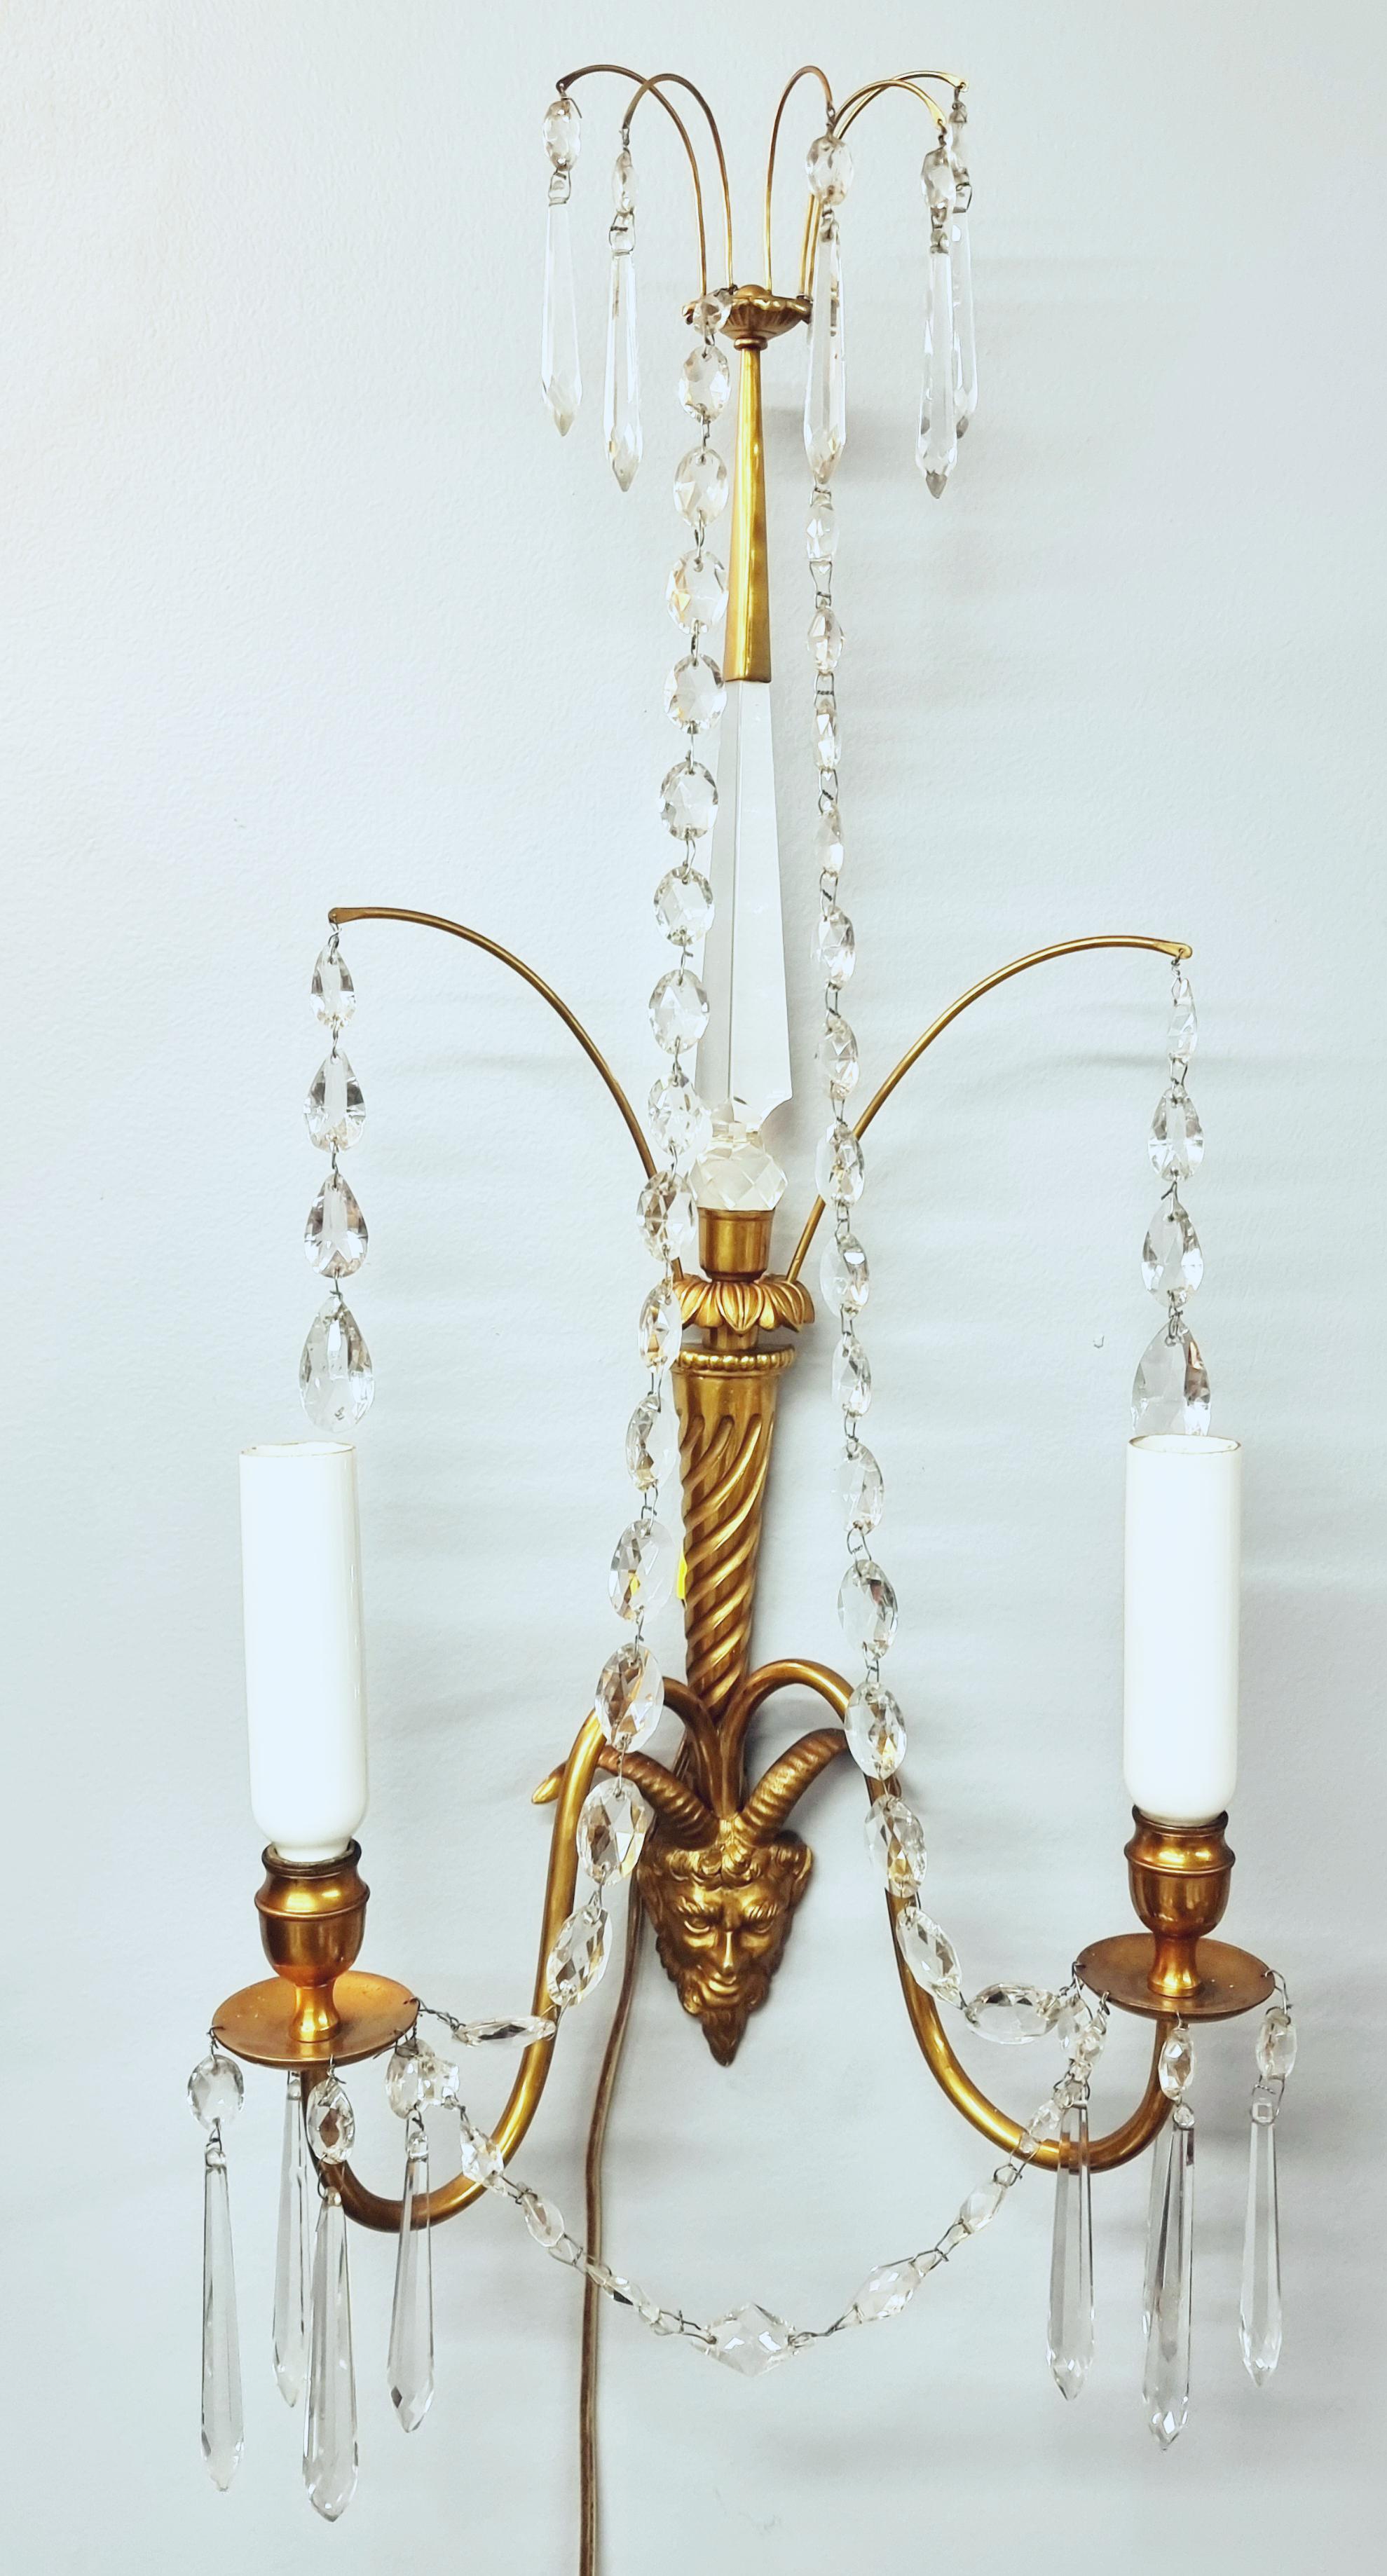 Pair of Baltic Gilt Satyr Faun Head Wall Sconces, Late 19th / Early 20th Century For Sale 7